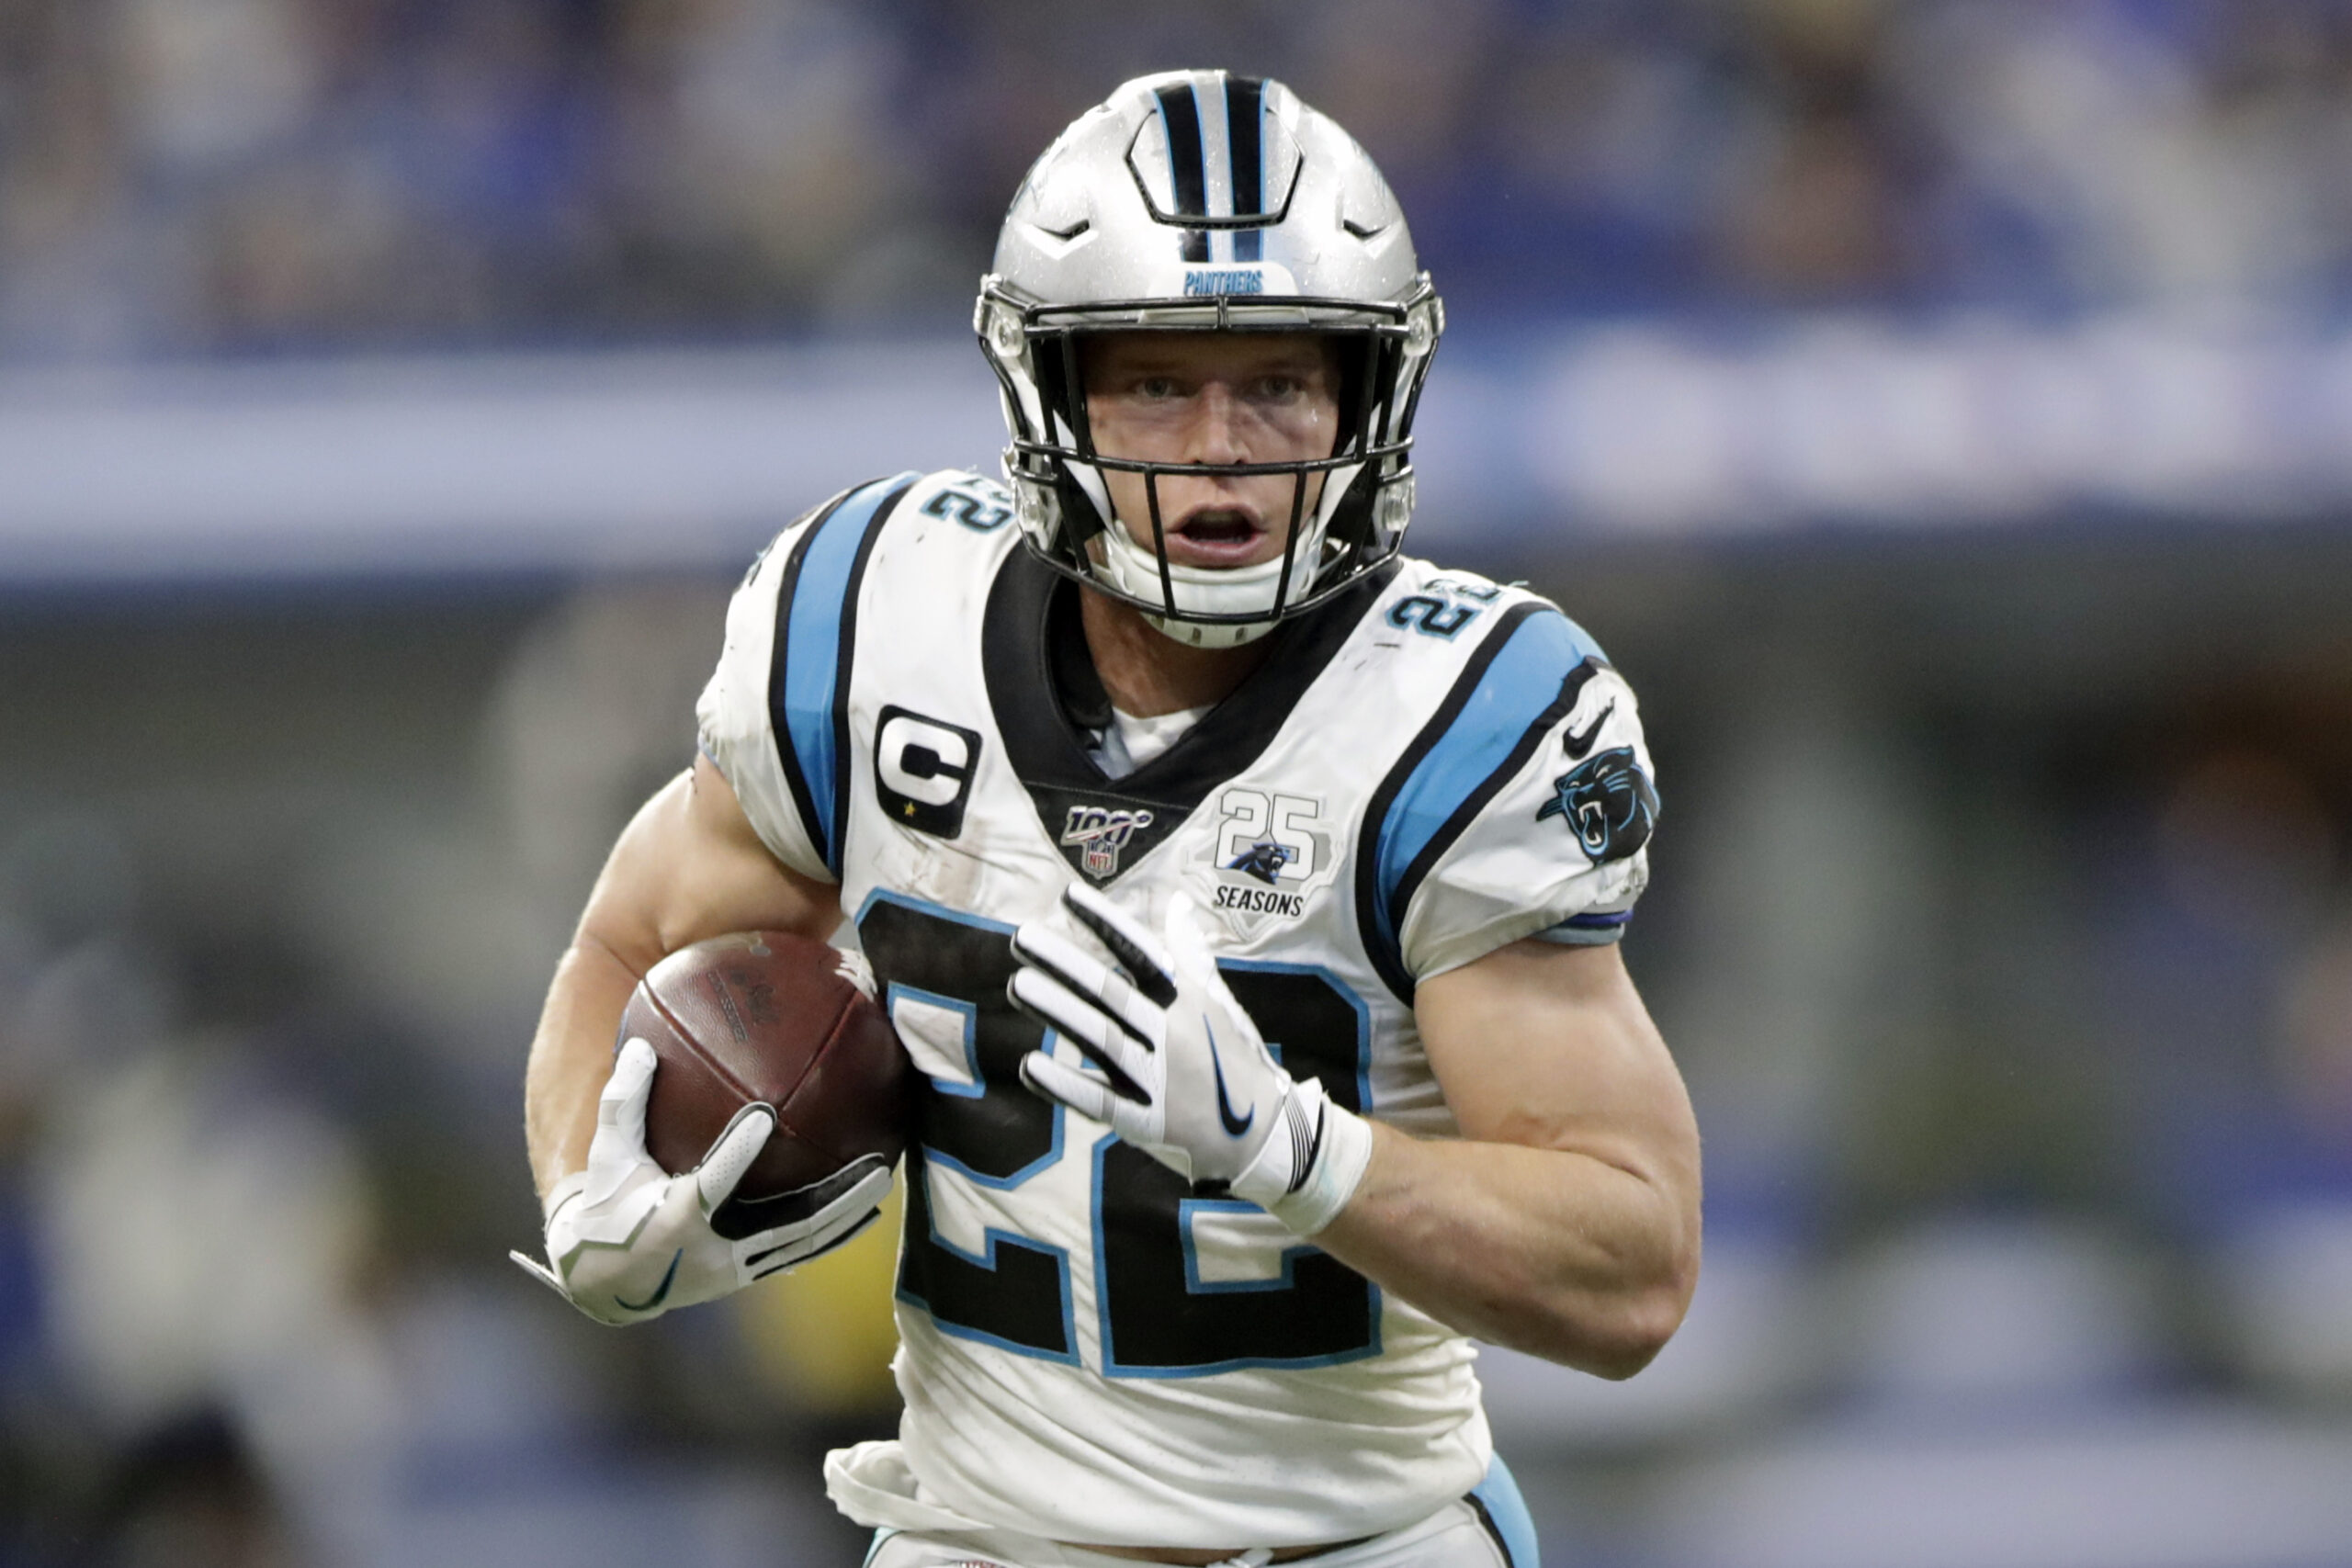 cmc 3 scaled - Re-Ranking the Top 10 Players on the NFL Top 100 List